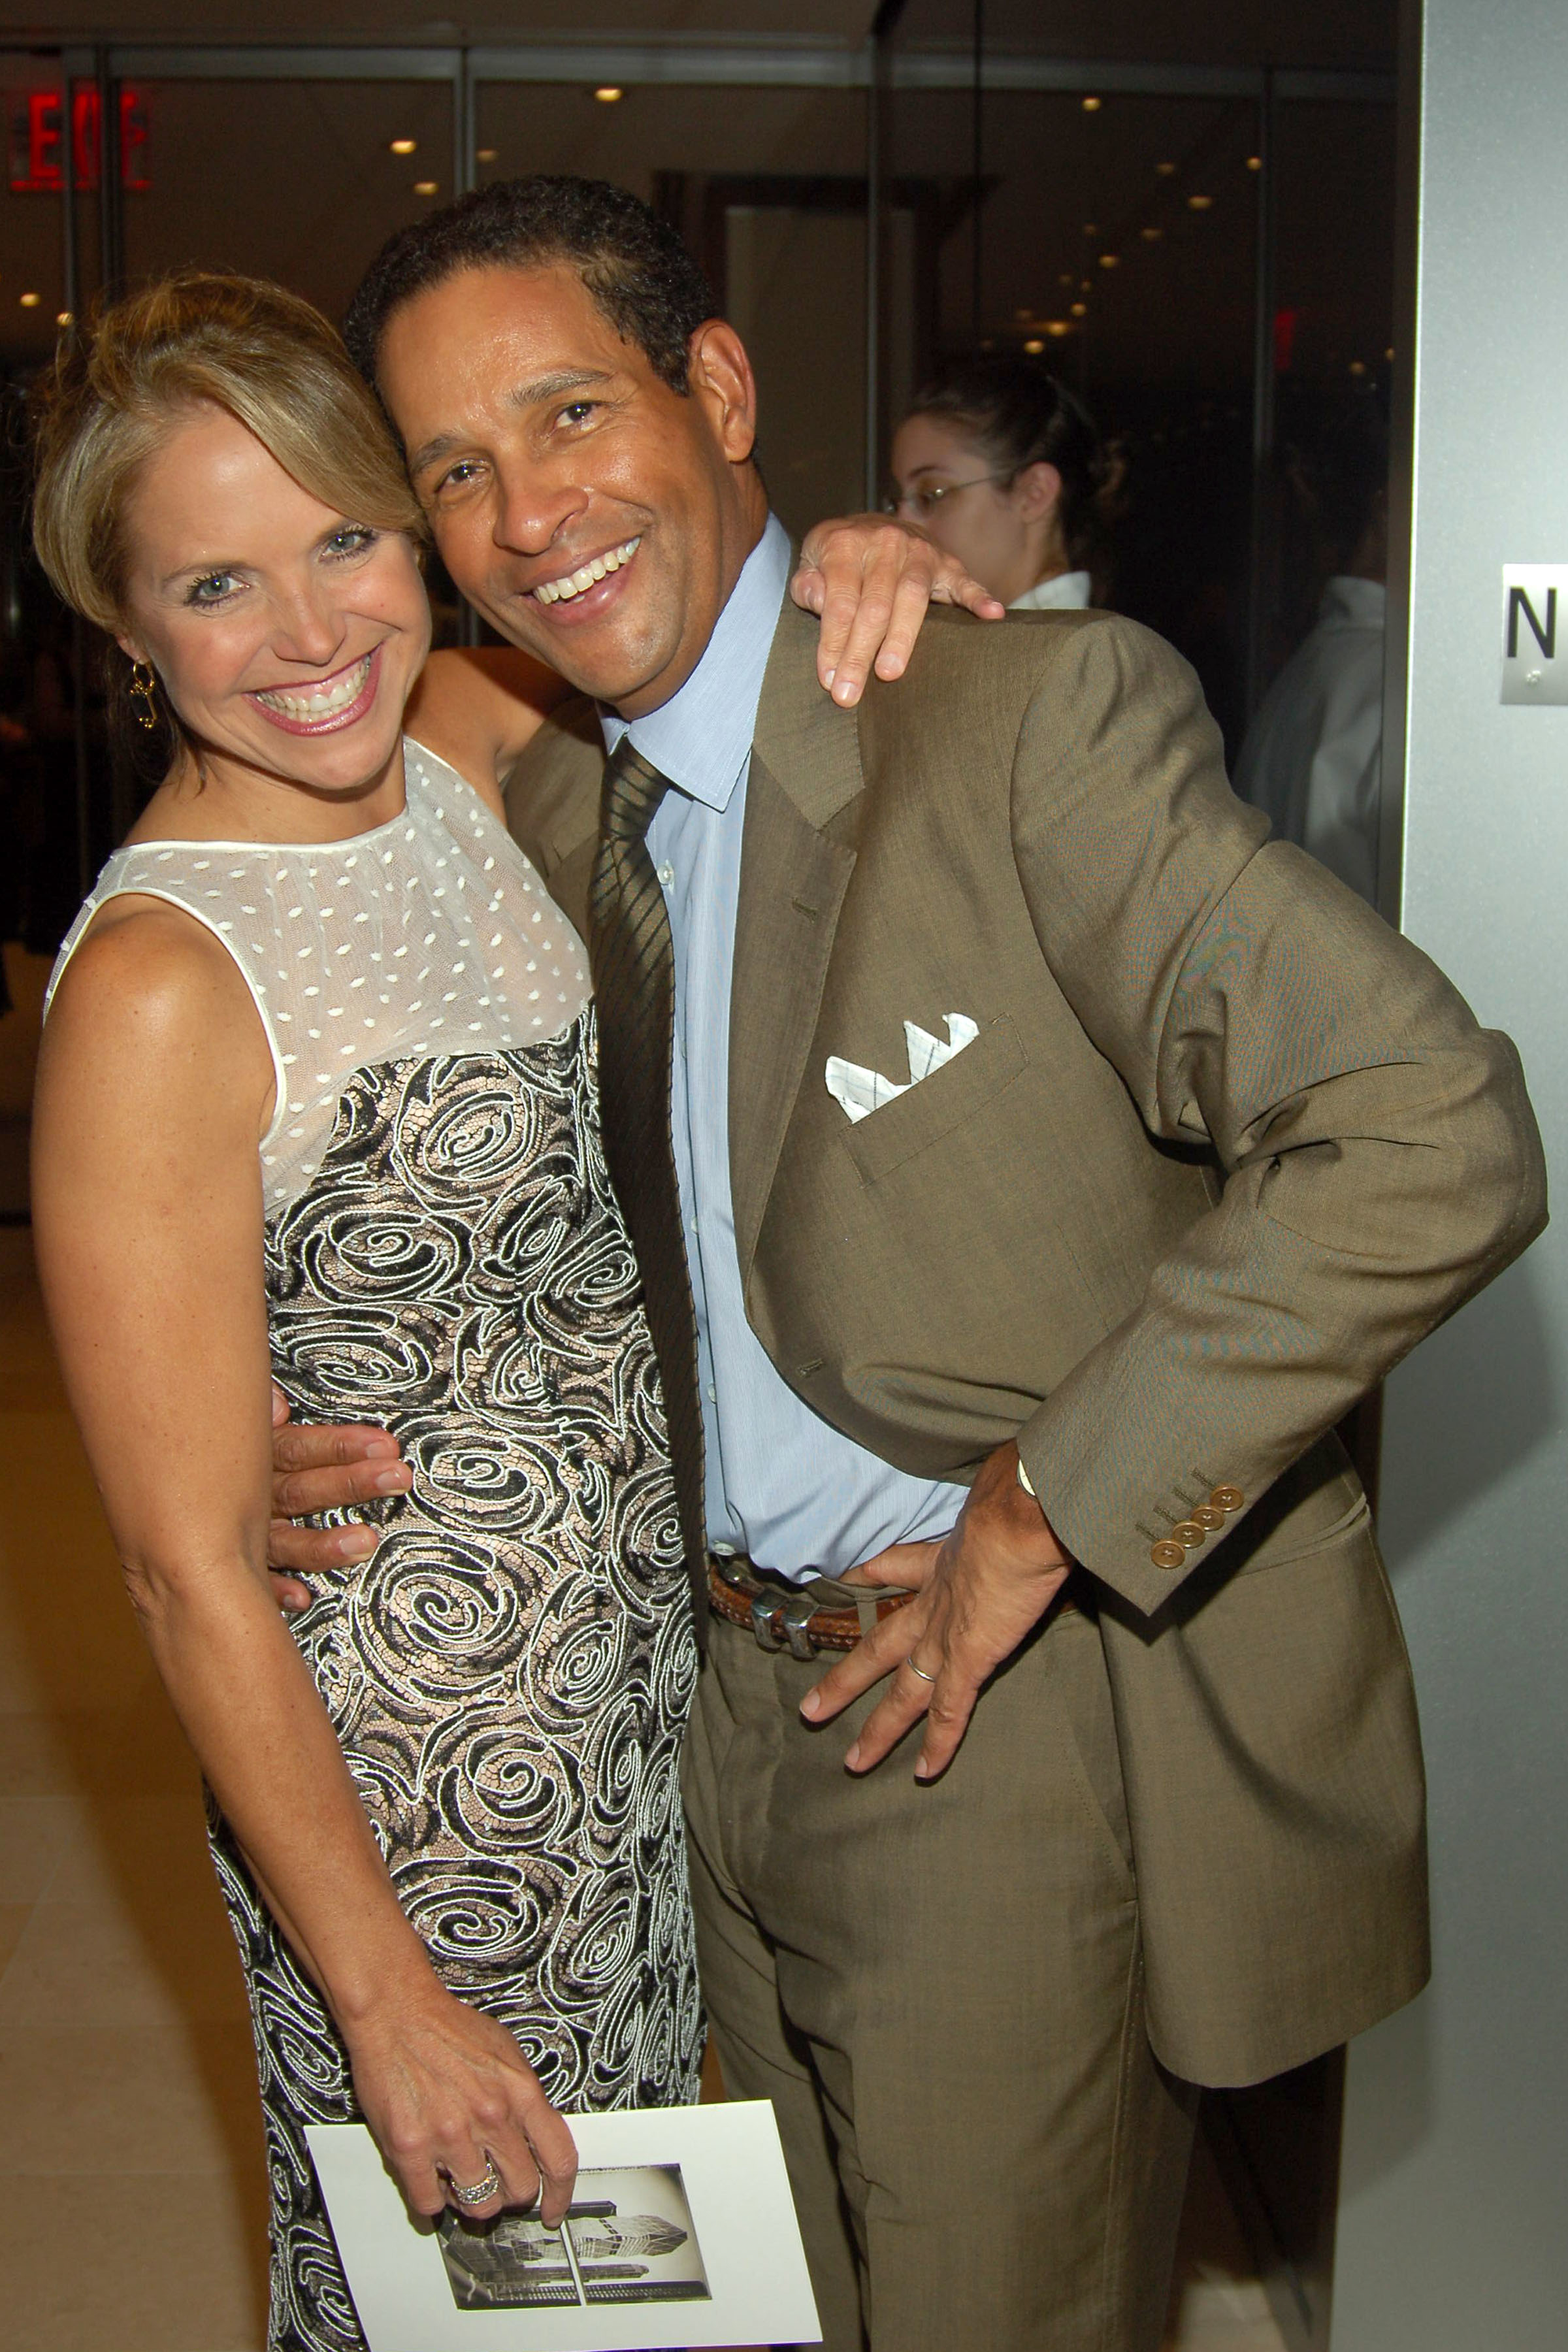 Katie Couric and Bryant Gumbel at an event, both smiling. Katie is in a patterned dress and Bryant is in a suit with a pocket square